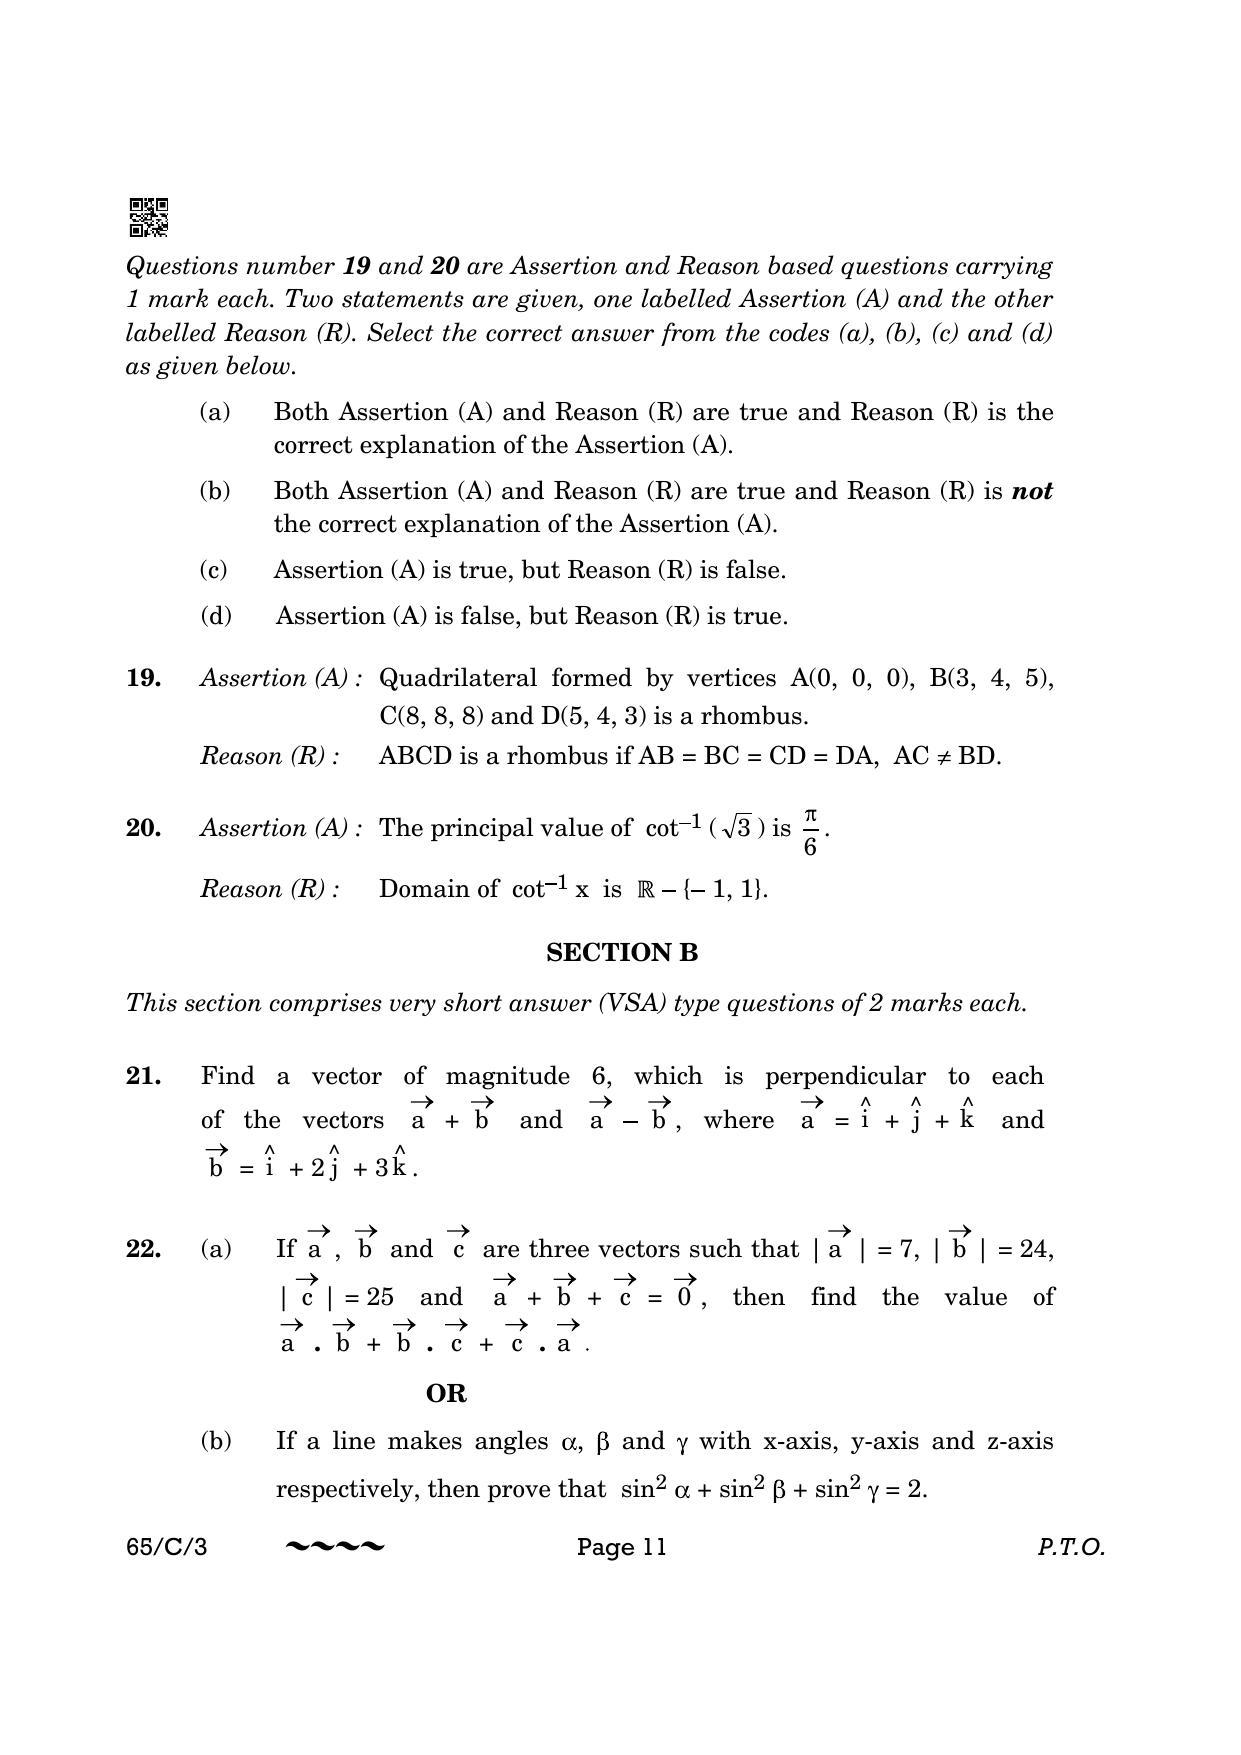 CBSE Class 12 65-3- Mathematics 2023 (Compartment) Question Paper - Page 11